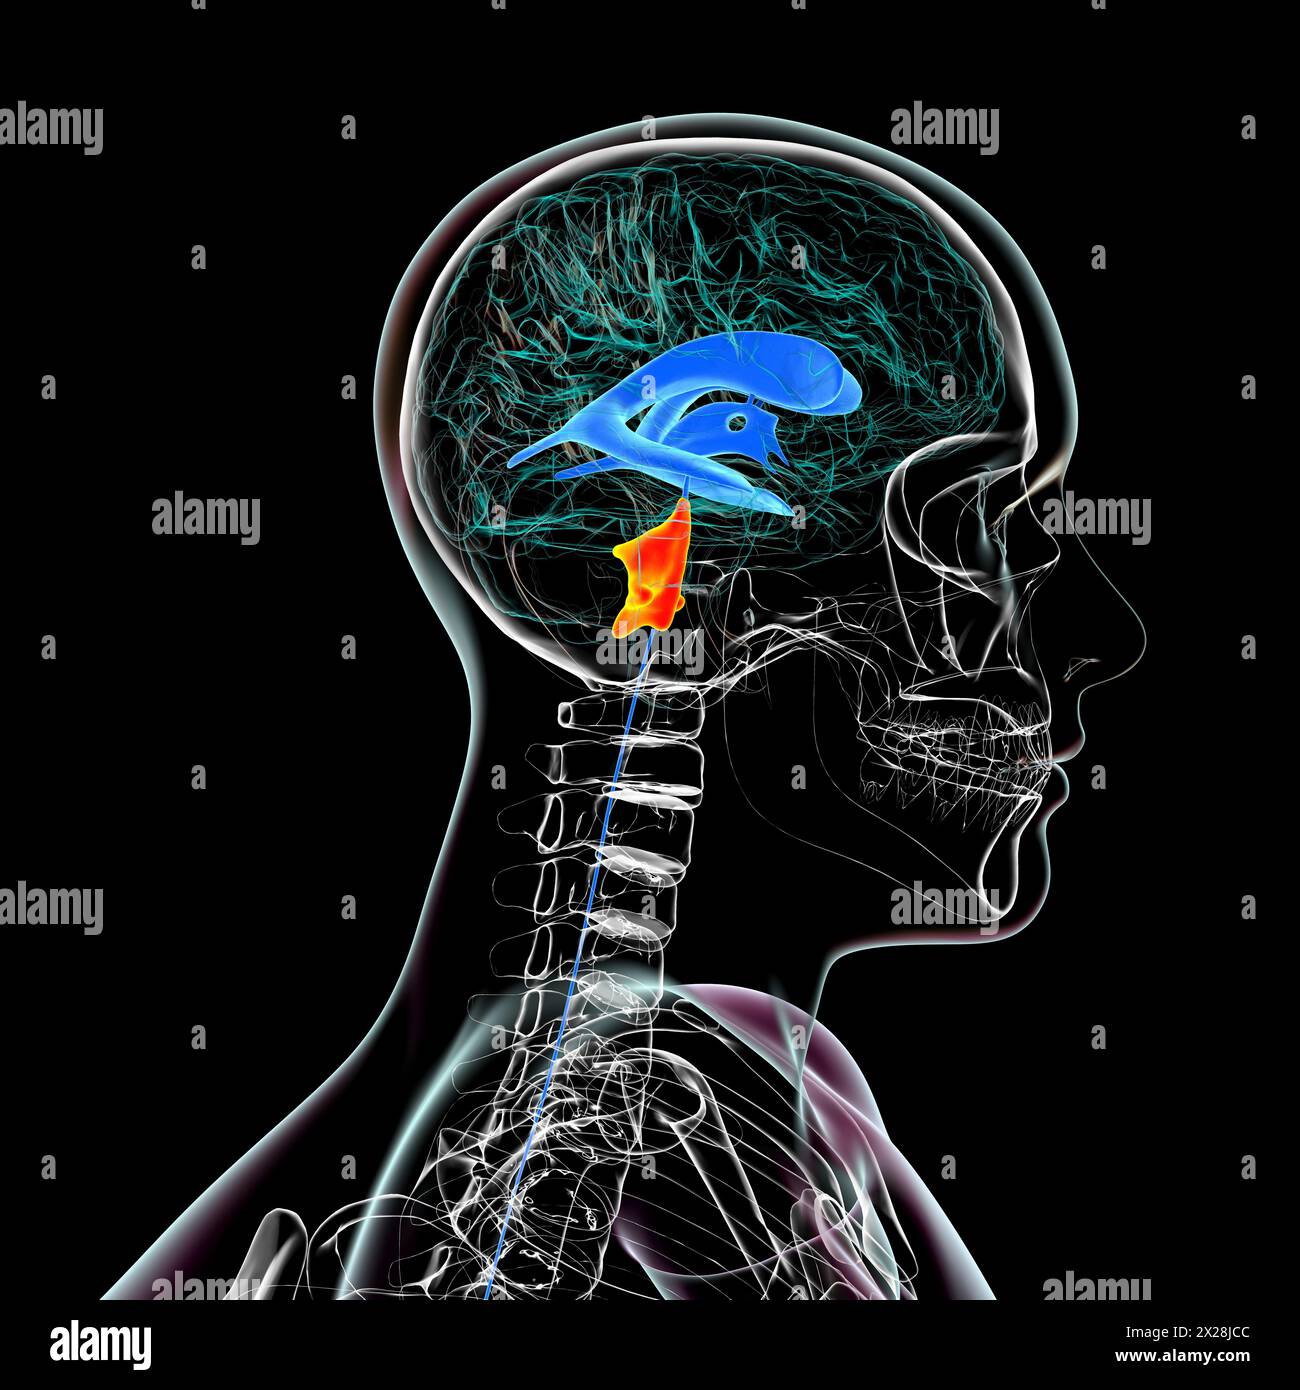 Enlargement of the fourth brain ventricle, illustration Stock Photo